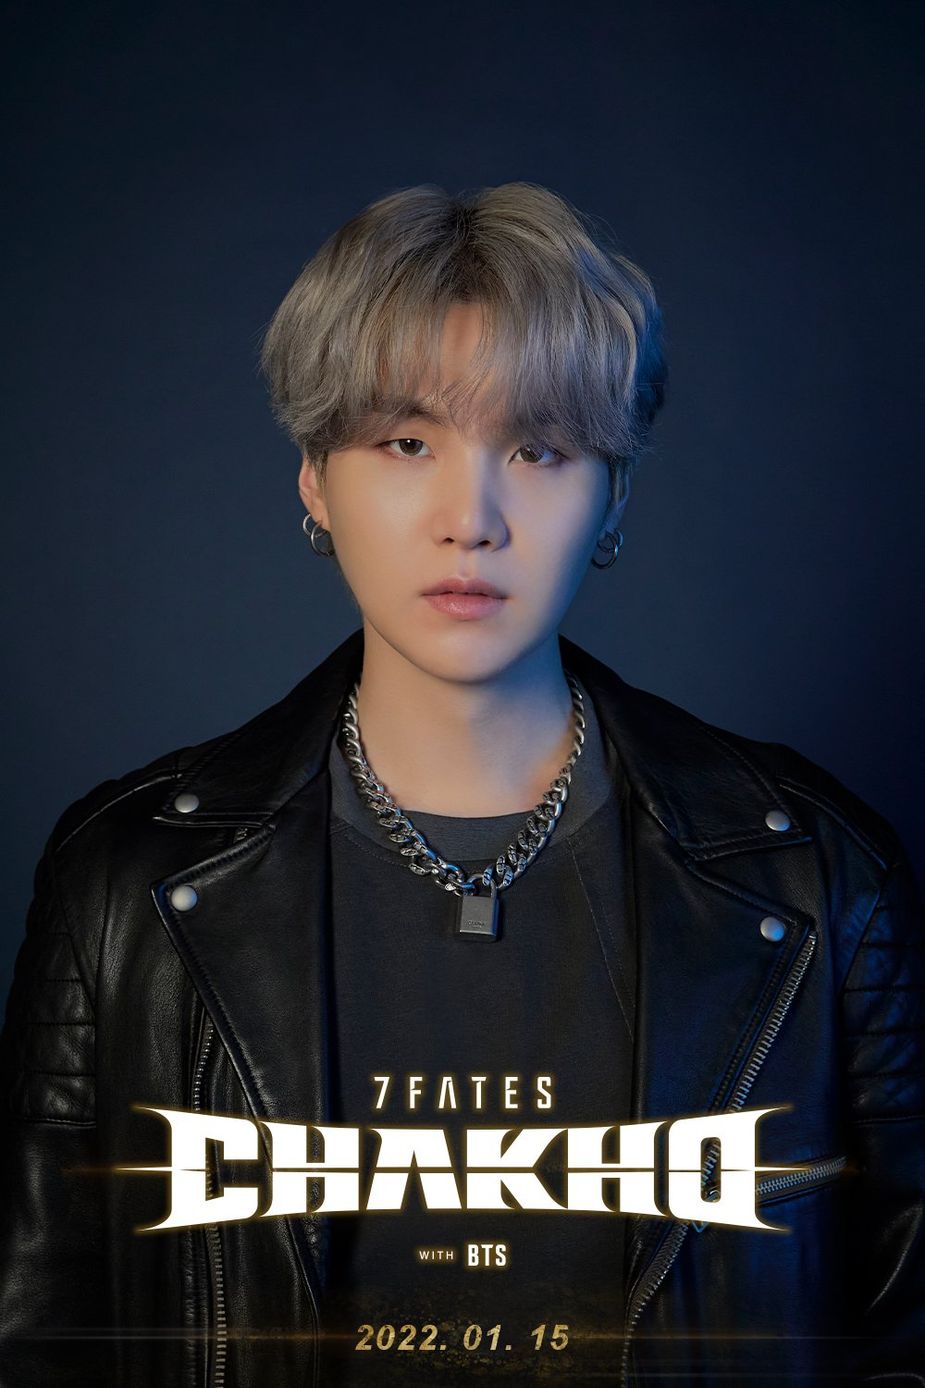 BTS SUGA's merch sells out before even officially going on sale?